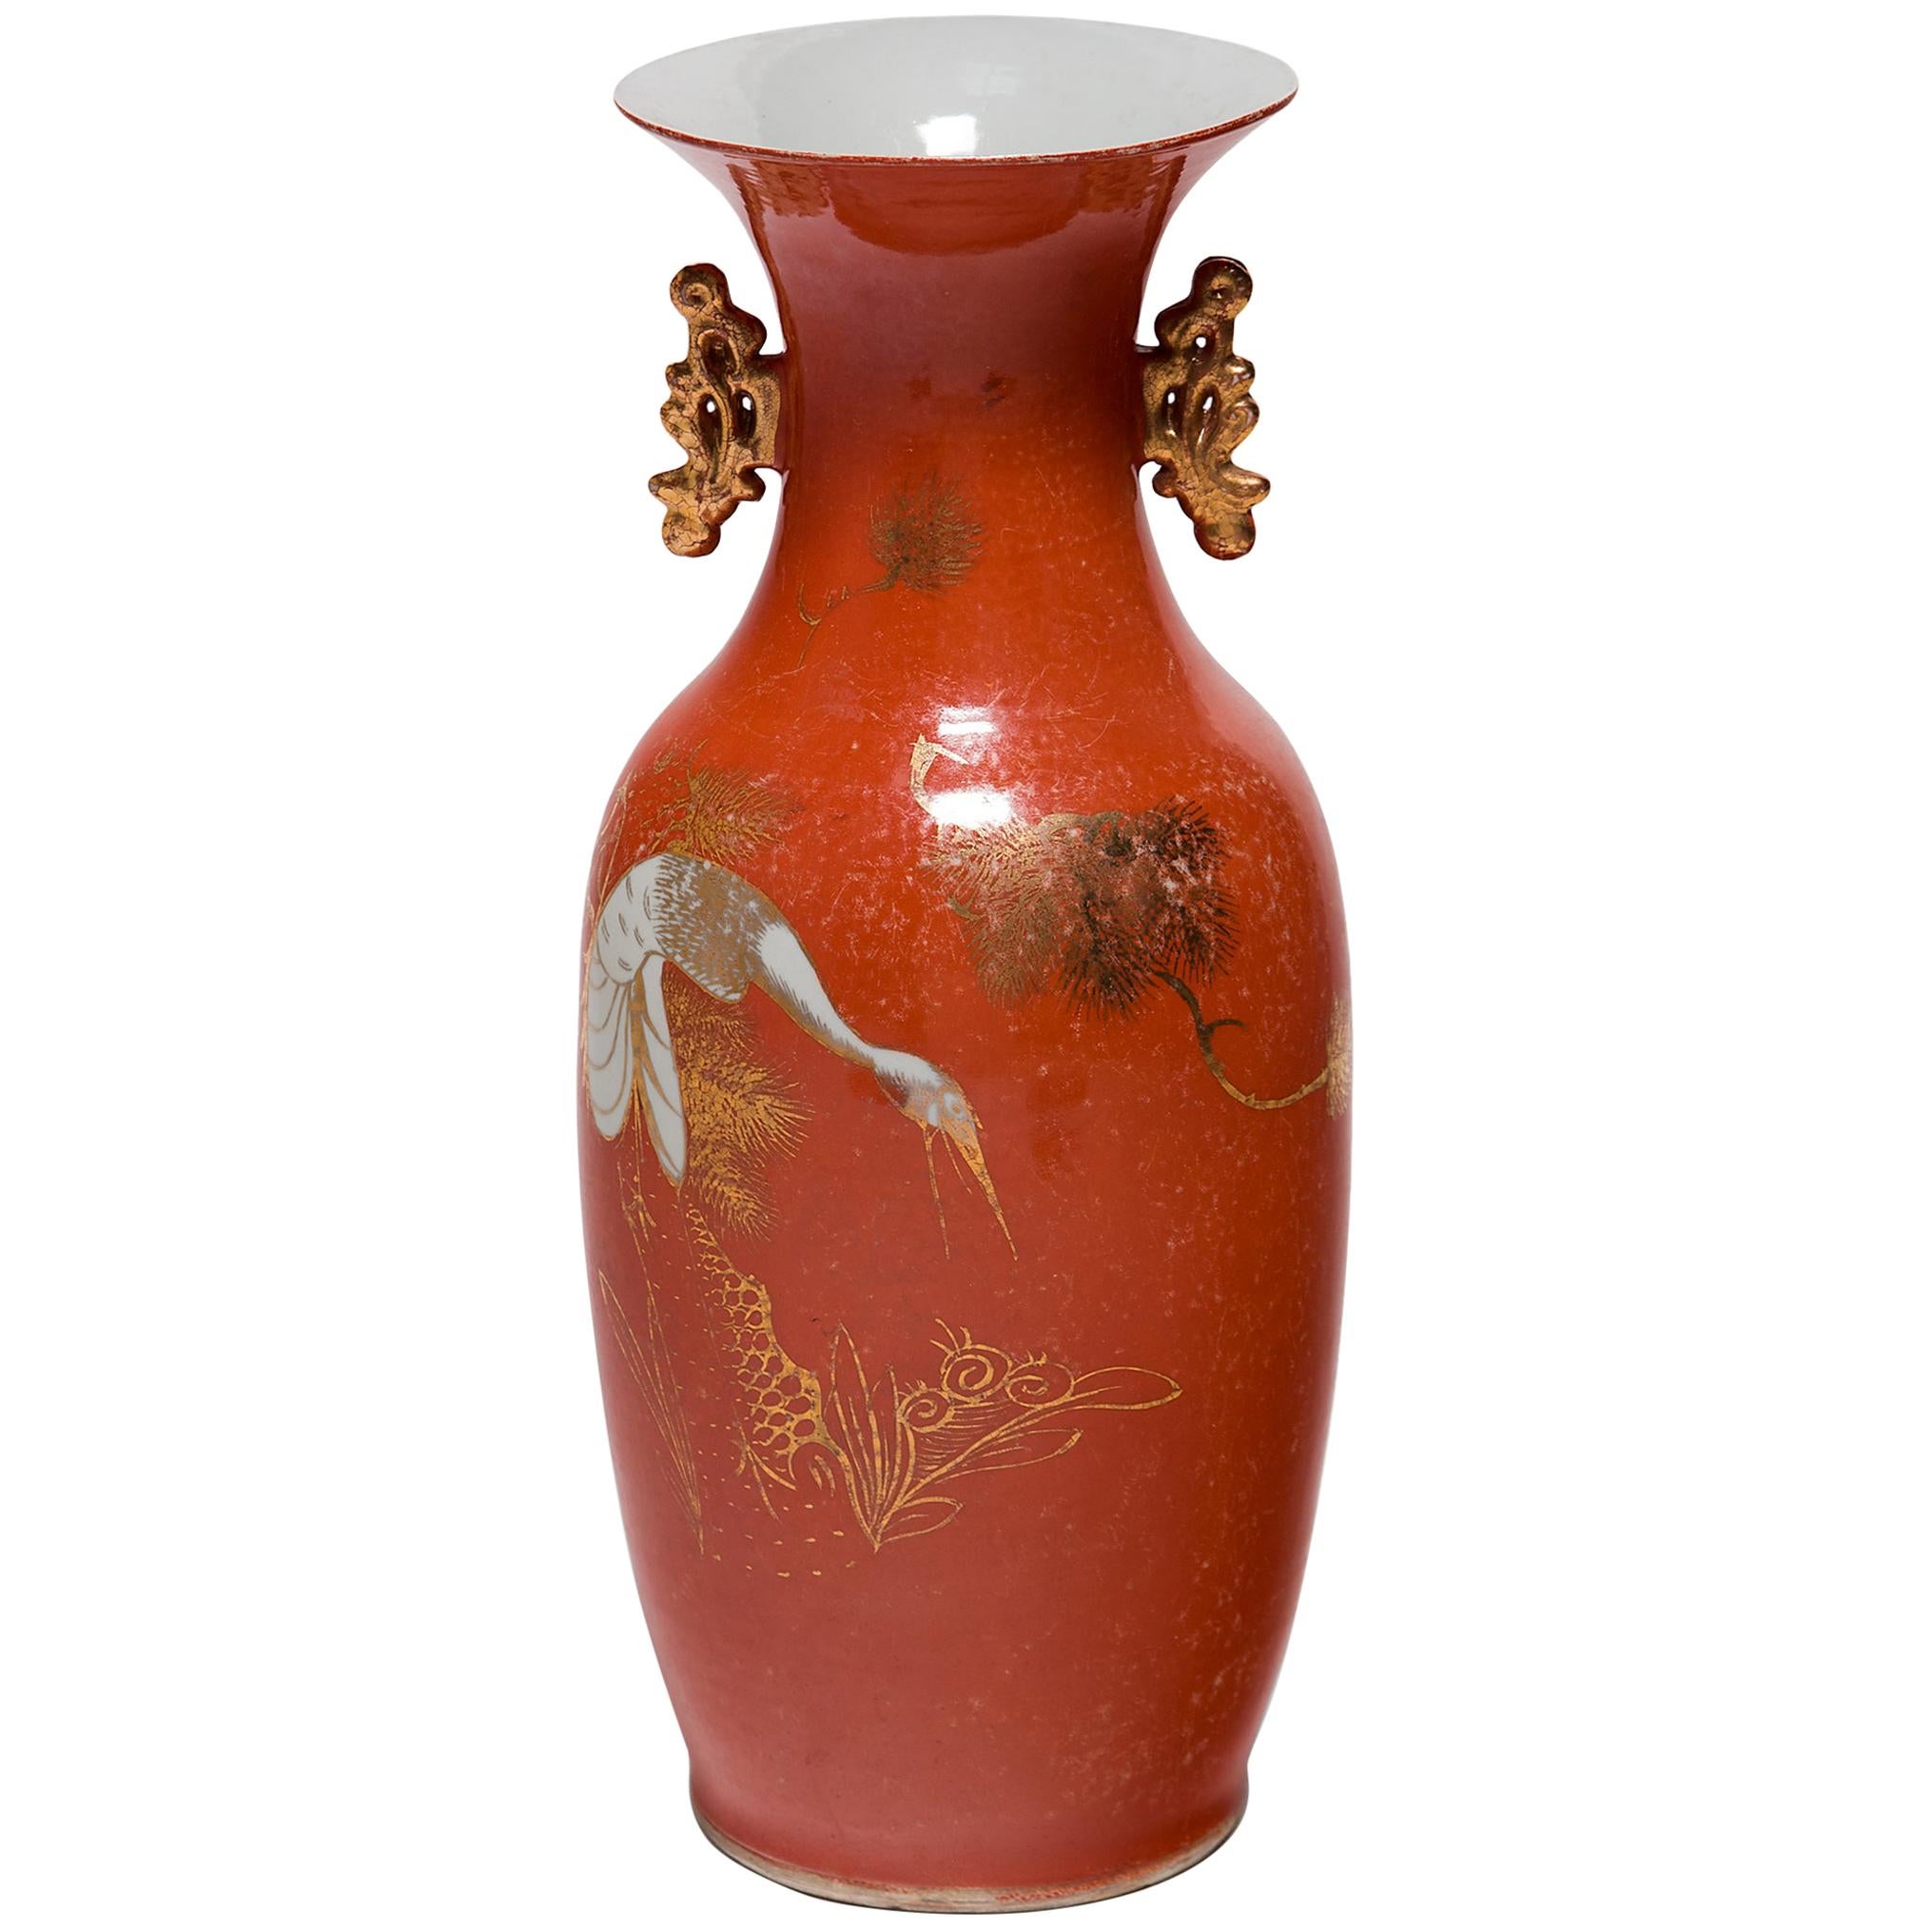 Chinese Art Deco Persimmon Vase with White Cranes, circa 1920s For Sale